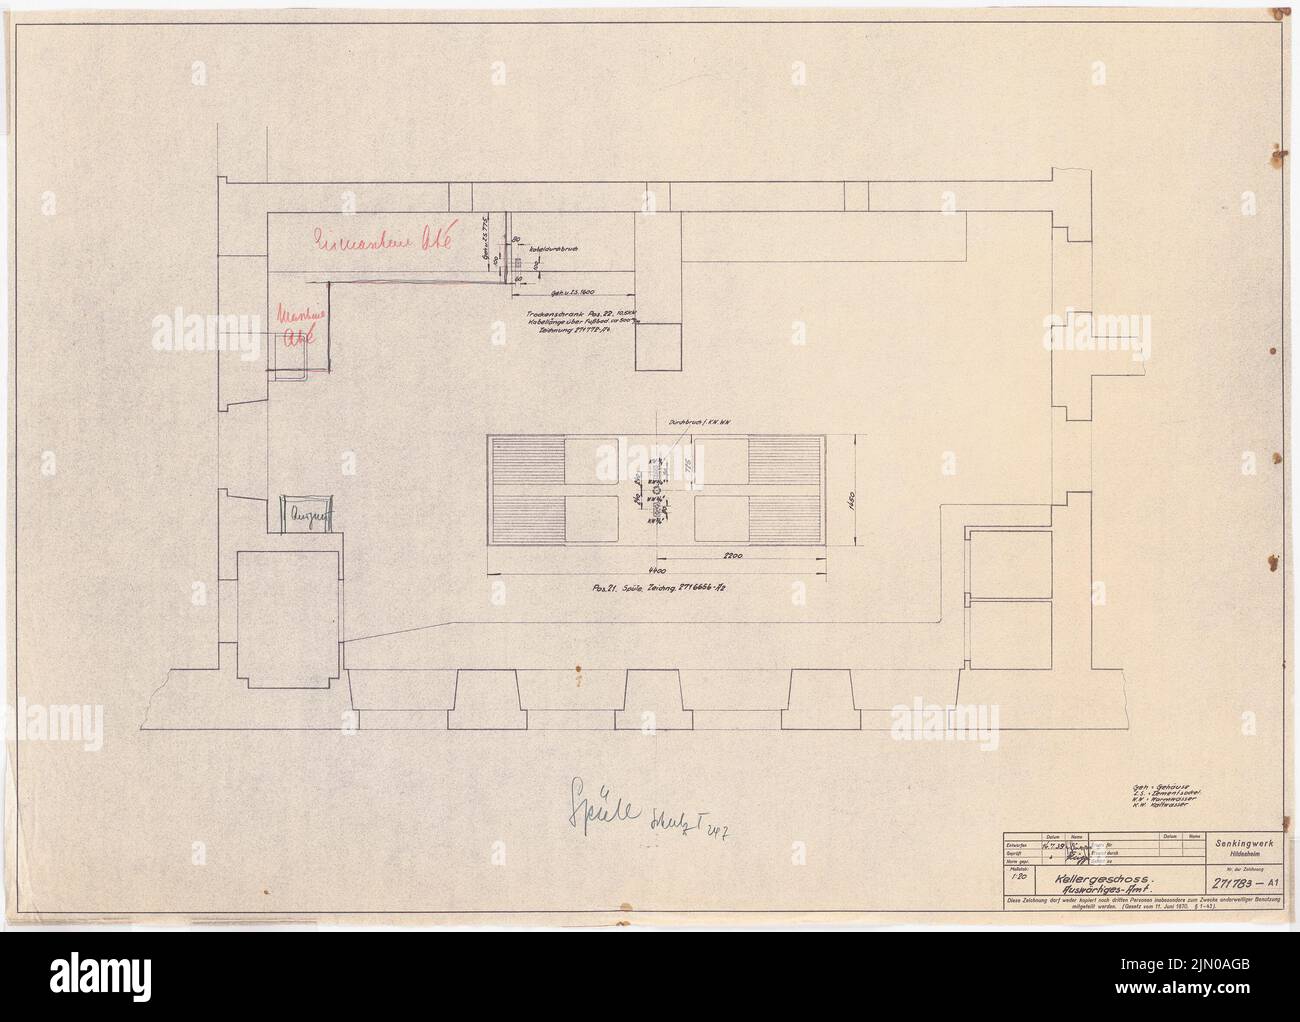 Böhmer Franz (1907-1943), Foreign Office in Berlin-Mitte (July 14, 1939): Floor plan of the sink KG 1:20. Pencil, colored pencil over light break on paper, 60.2 x 84 cm (including scan edges) Böhmer & Petrich : Auswärtiges Amt, Berlin-Mitte. Umbau Stock Photo